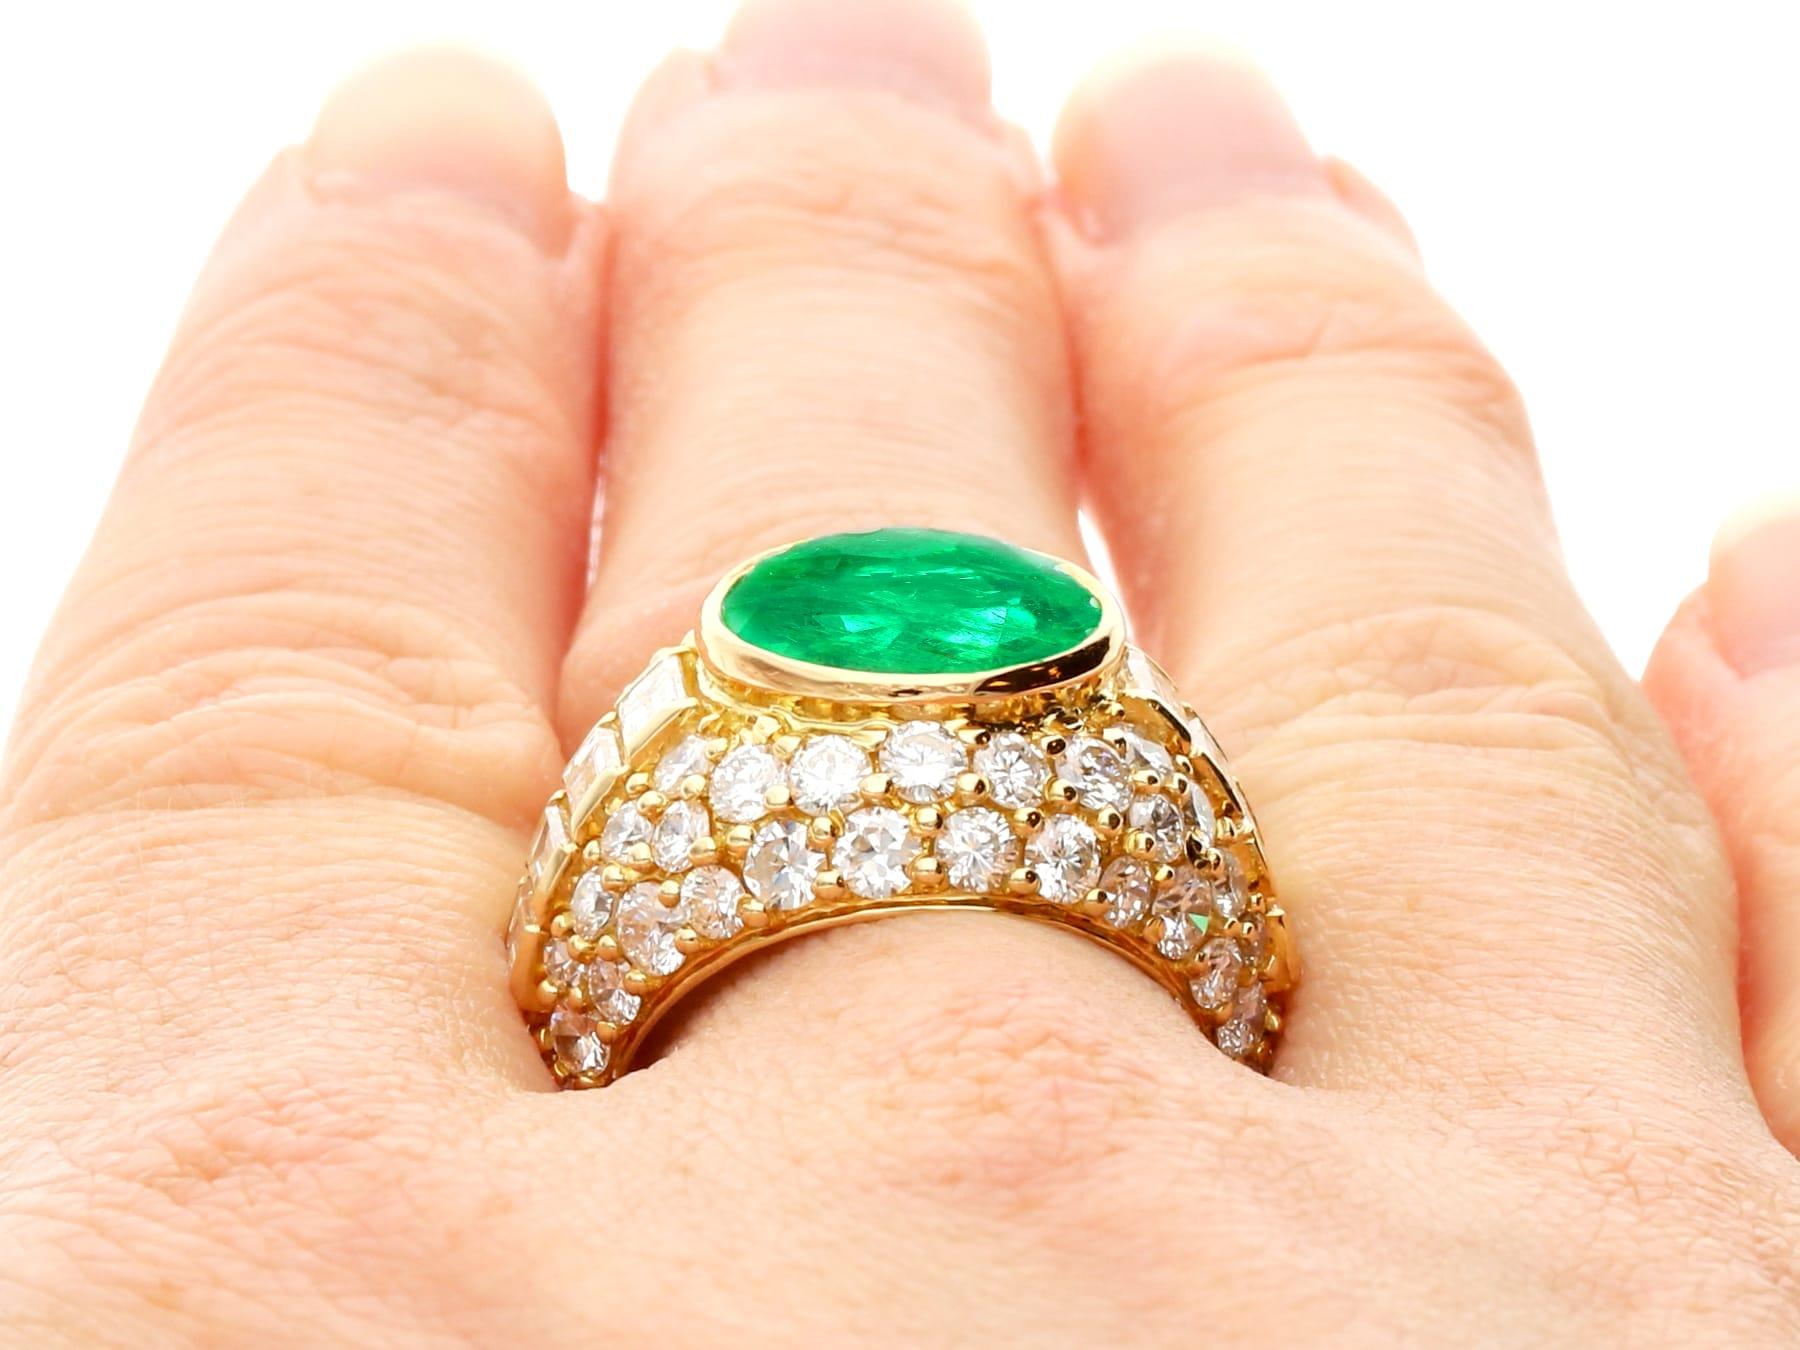 Vintage 5.12ct Colombian Emerald and 3.45ct Diamond, 18ct Yellow Gold Dress Ring For Sale 6